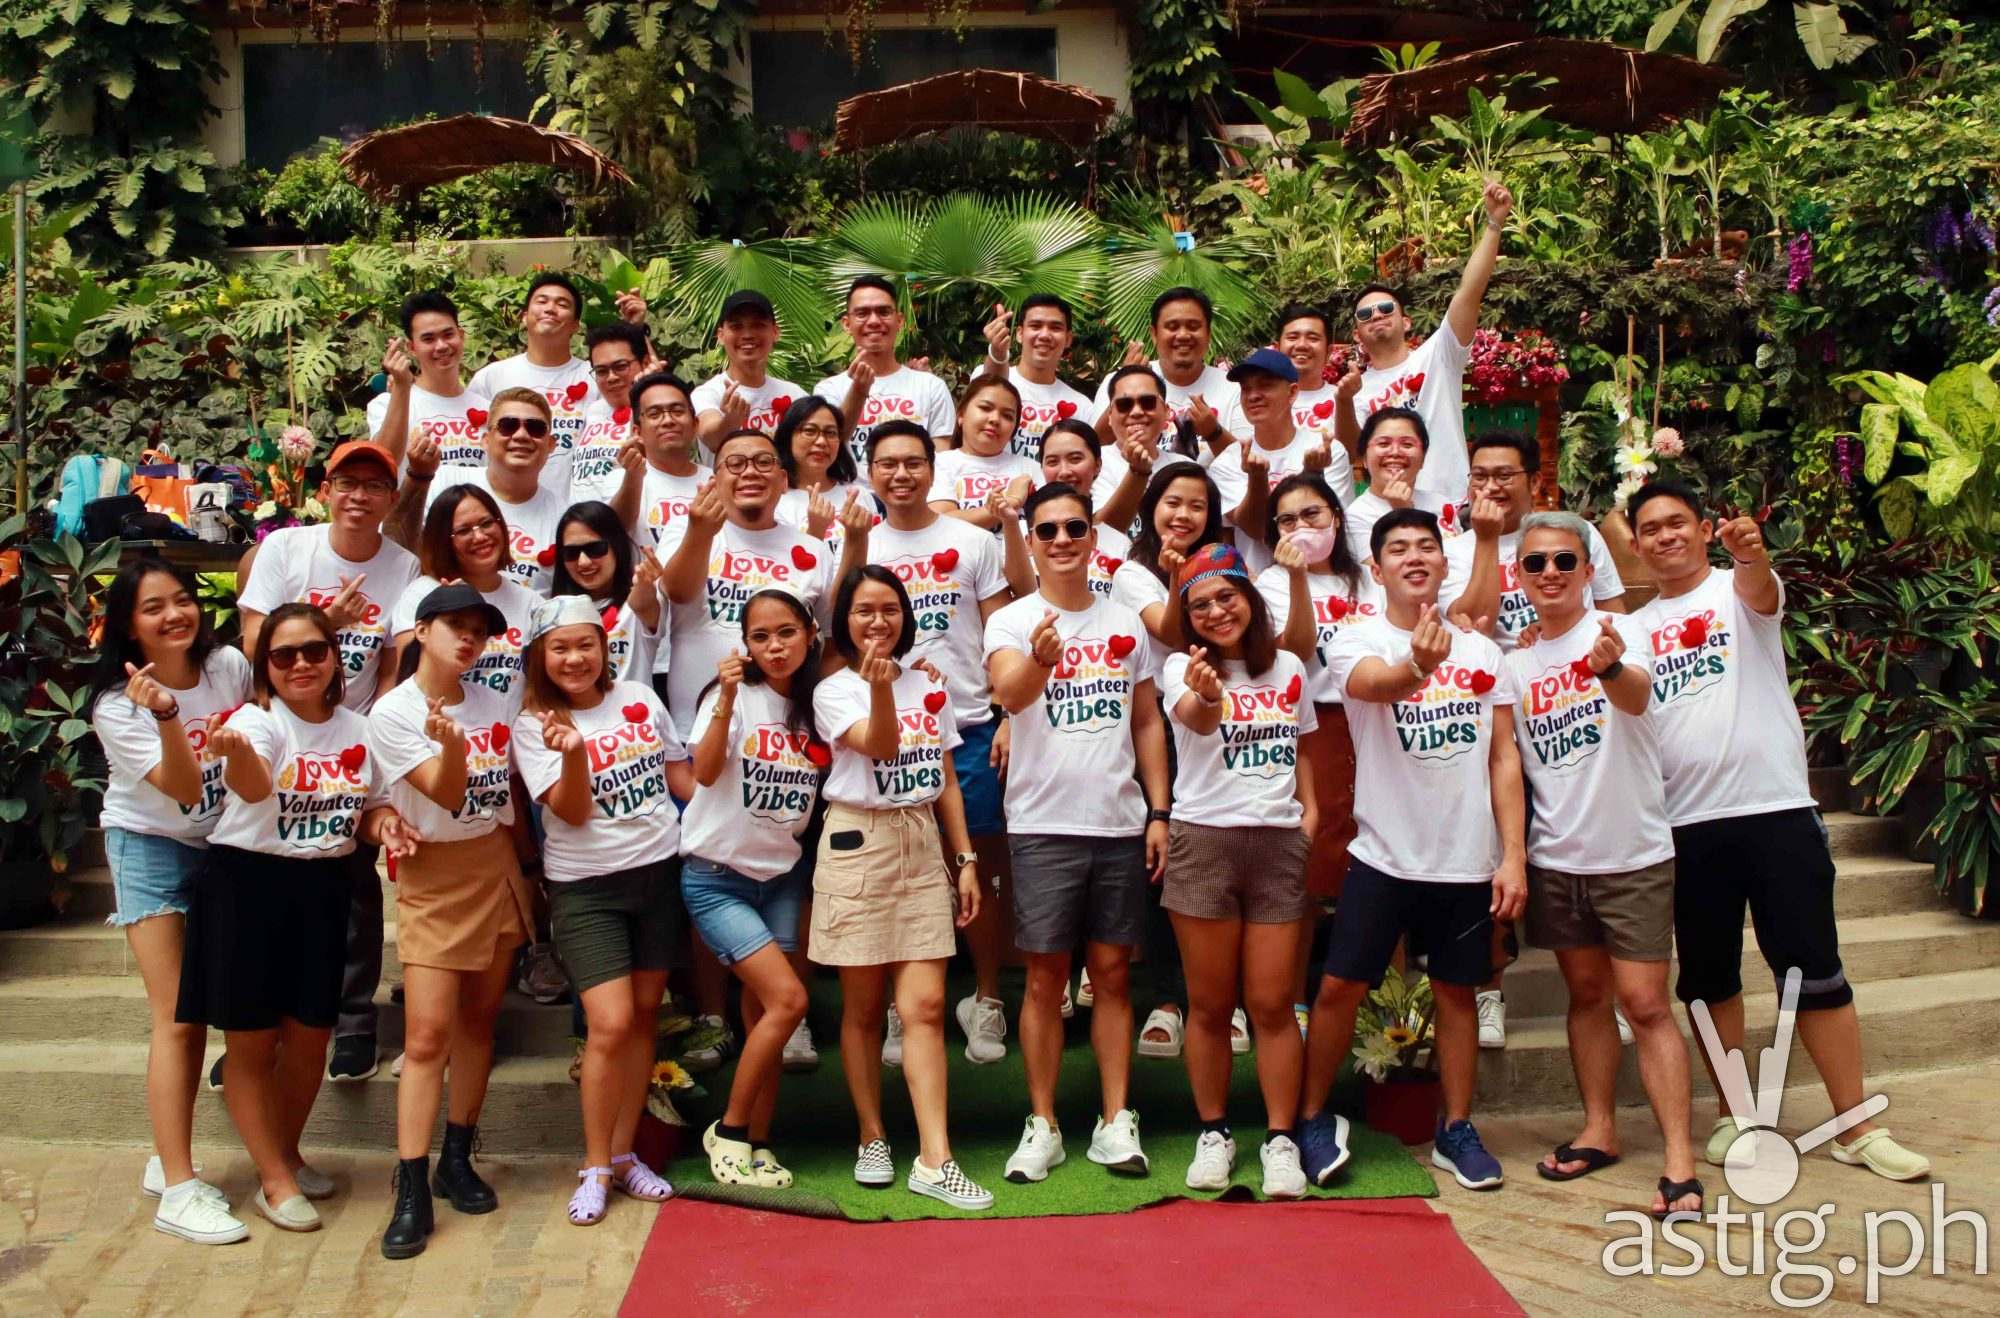 I am MAD launches 'Love the Volunteer Vibes' campaign in Davao